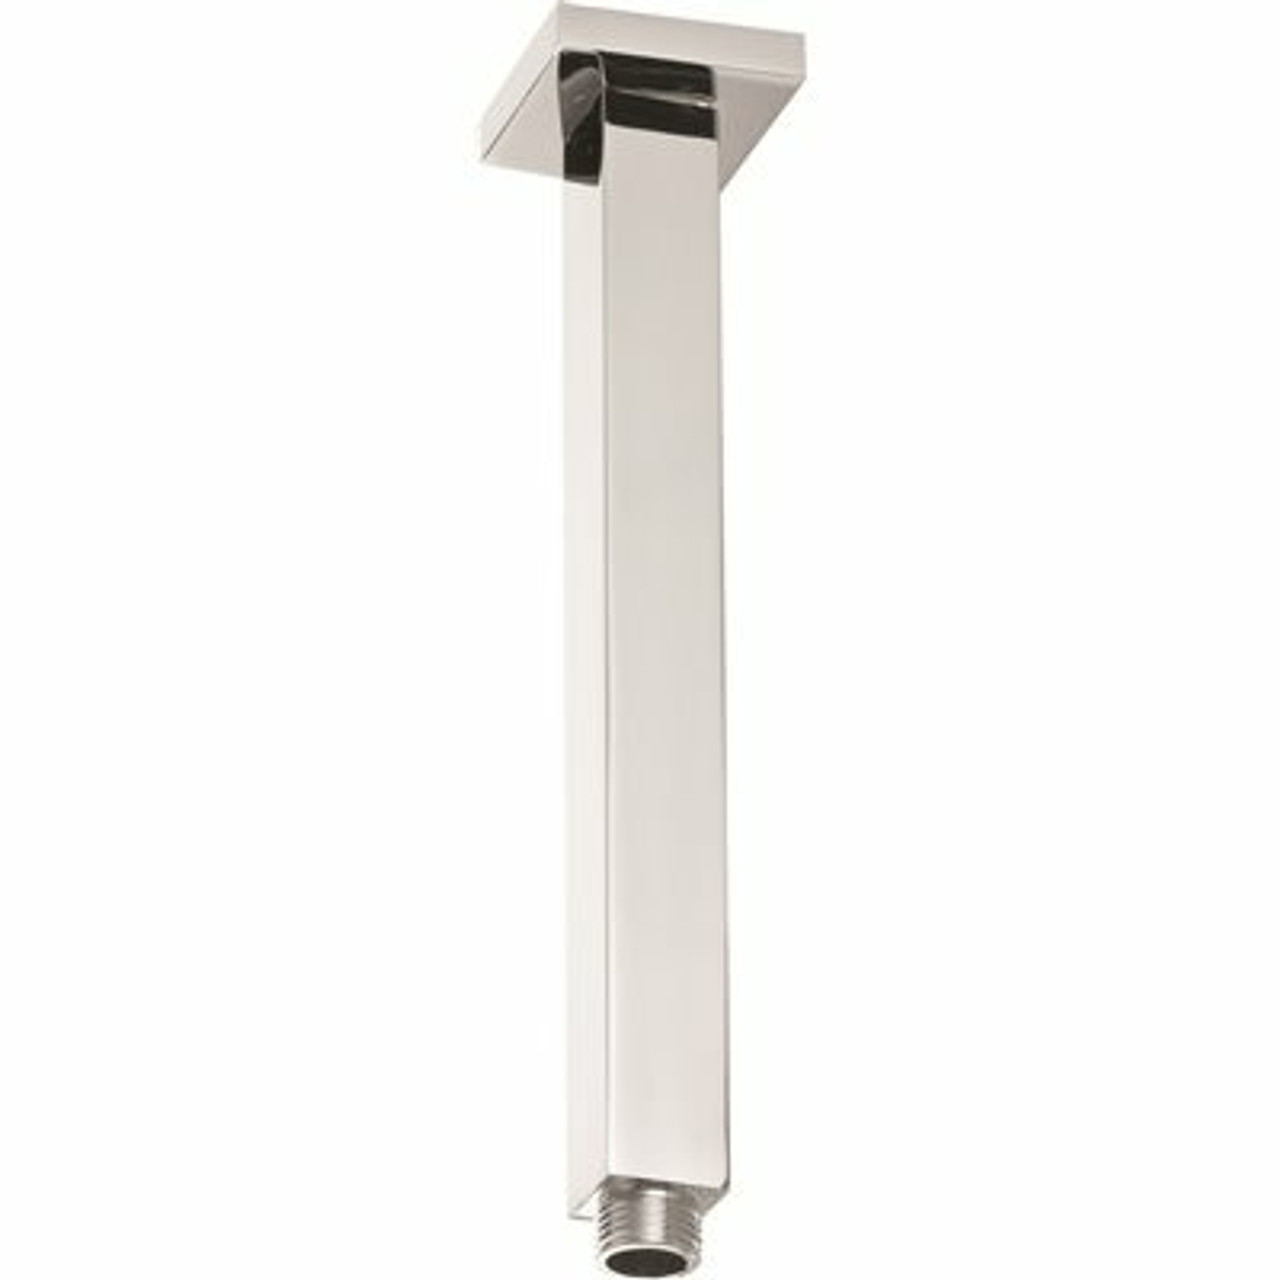 Westbrass 1/2 In. Ips True Square Ceiling Style Shower Arm With Square Flange, Polished Chrome